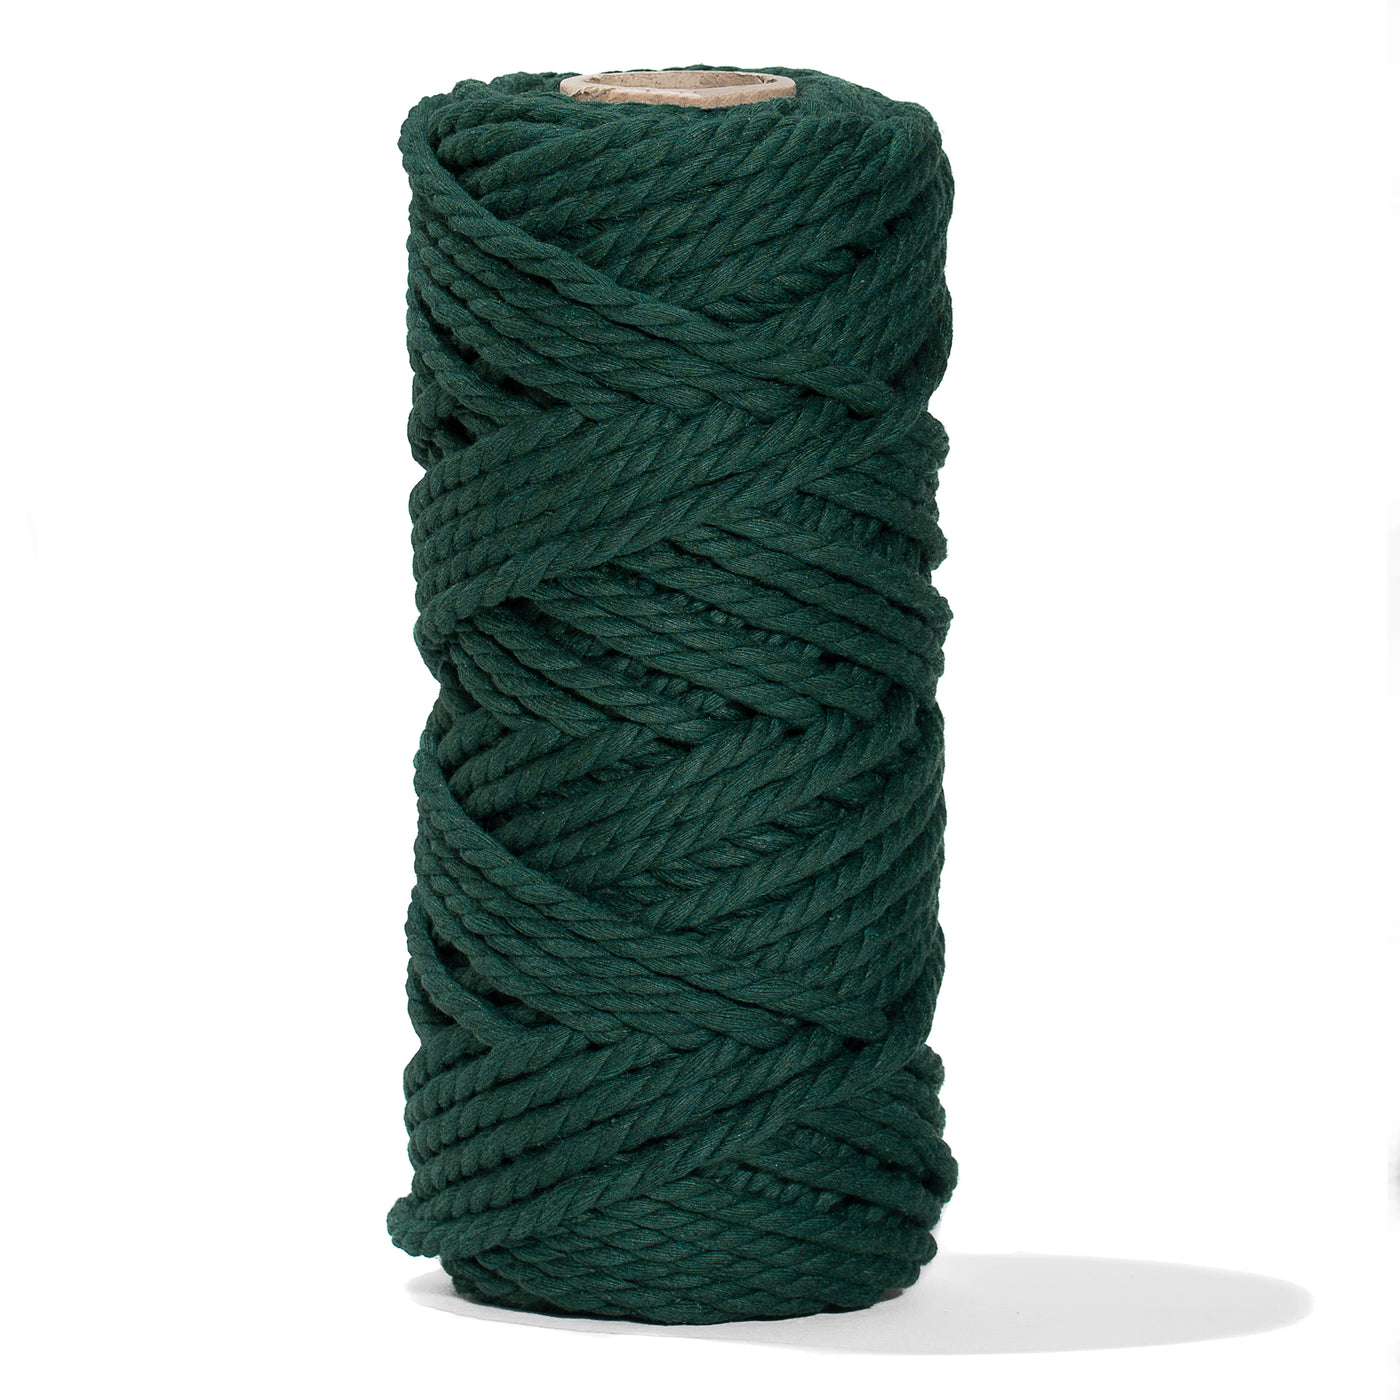 MACRAME COTTON ROPE 5 MM - 3 PLY - FOREST GREEN COLOR – GANXXET